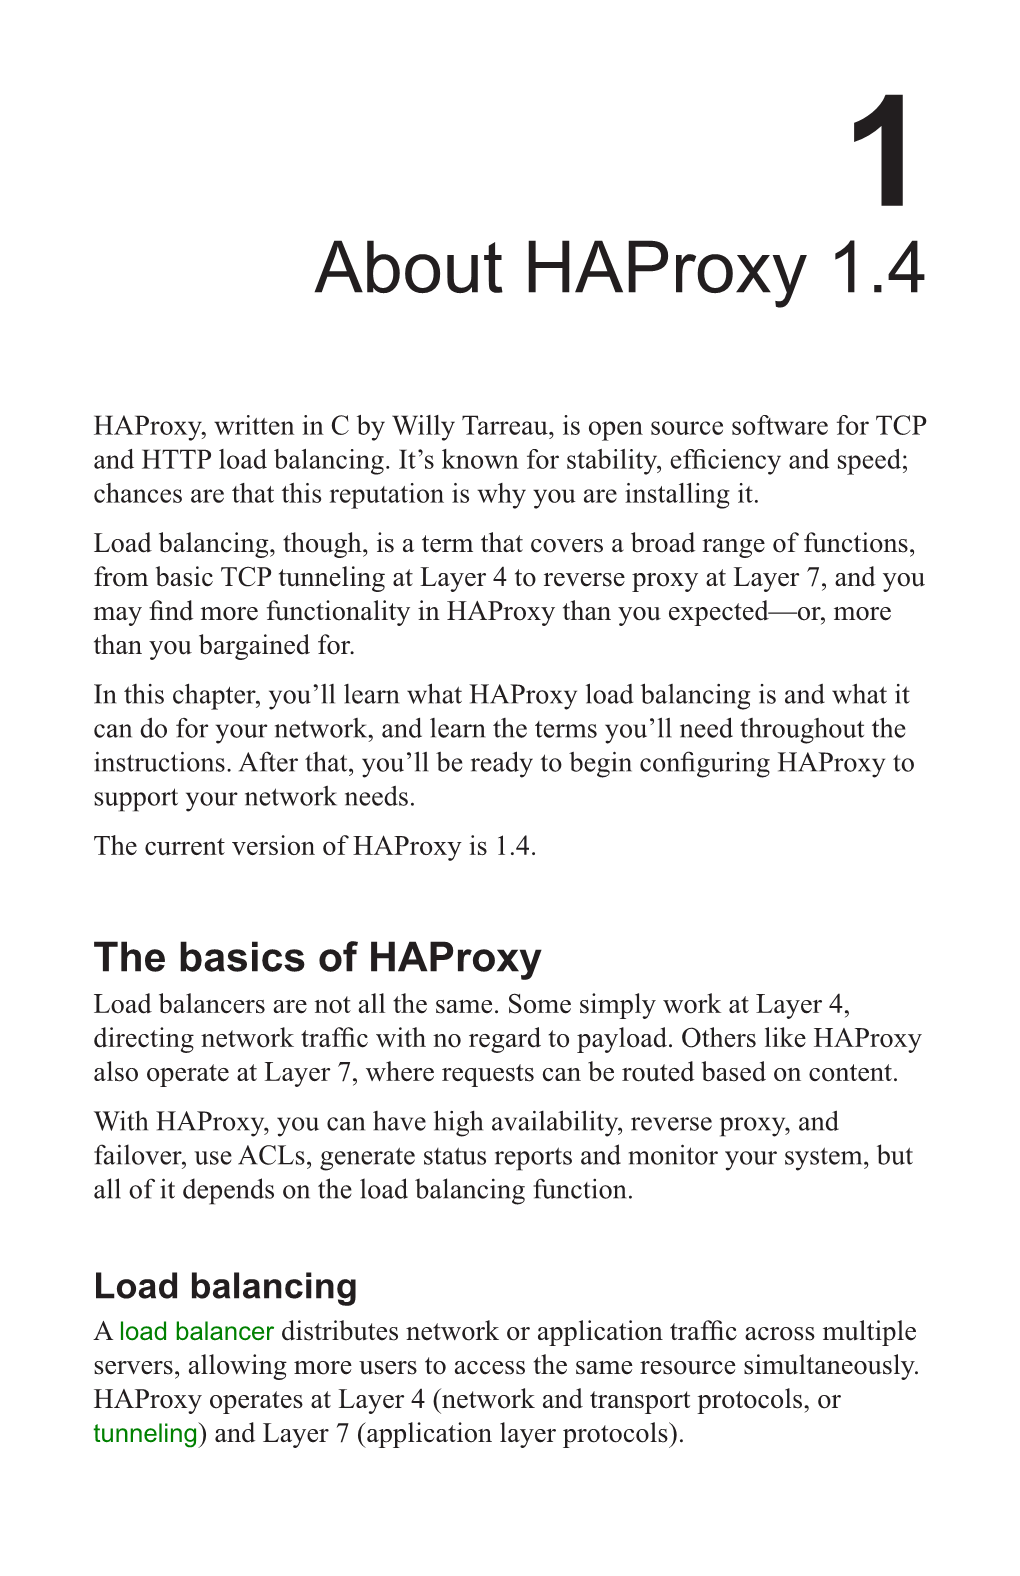 About Haproxy 1.4